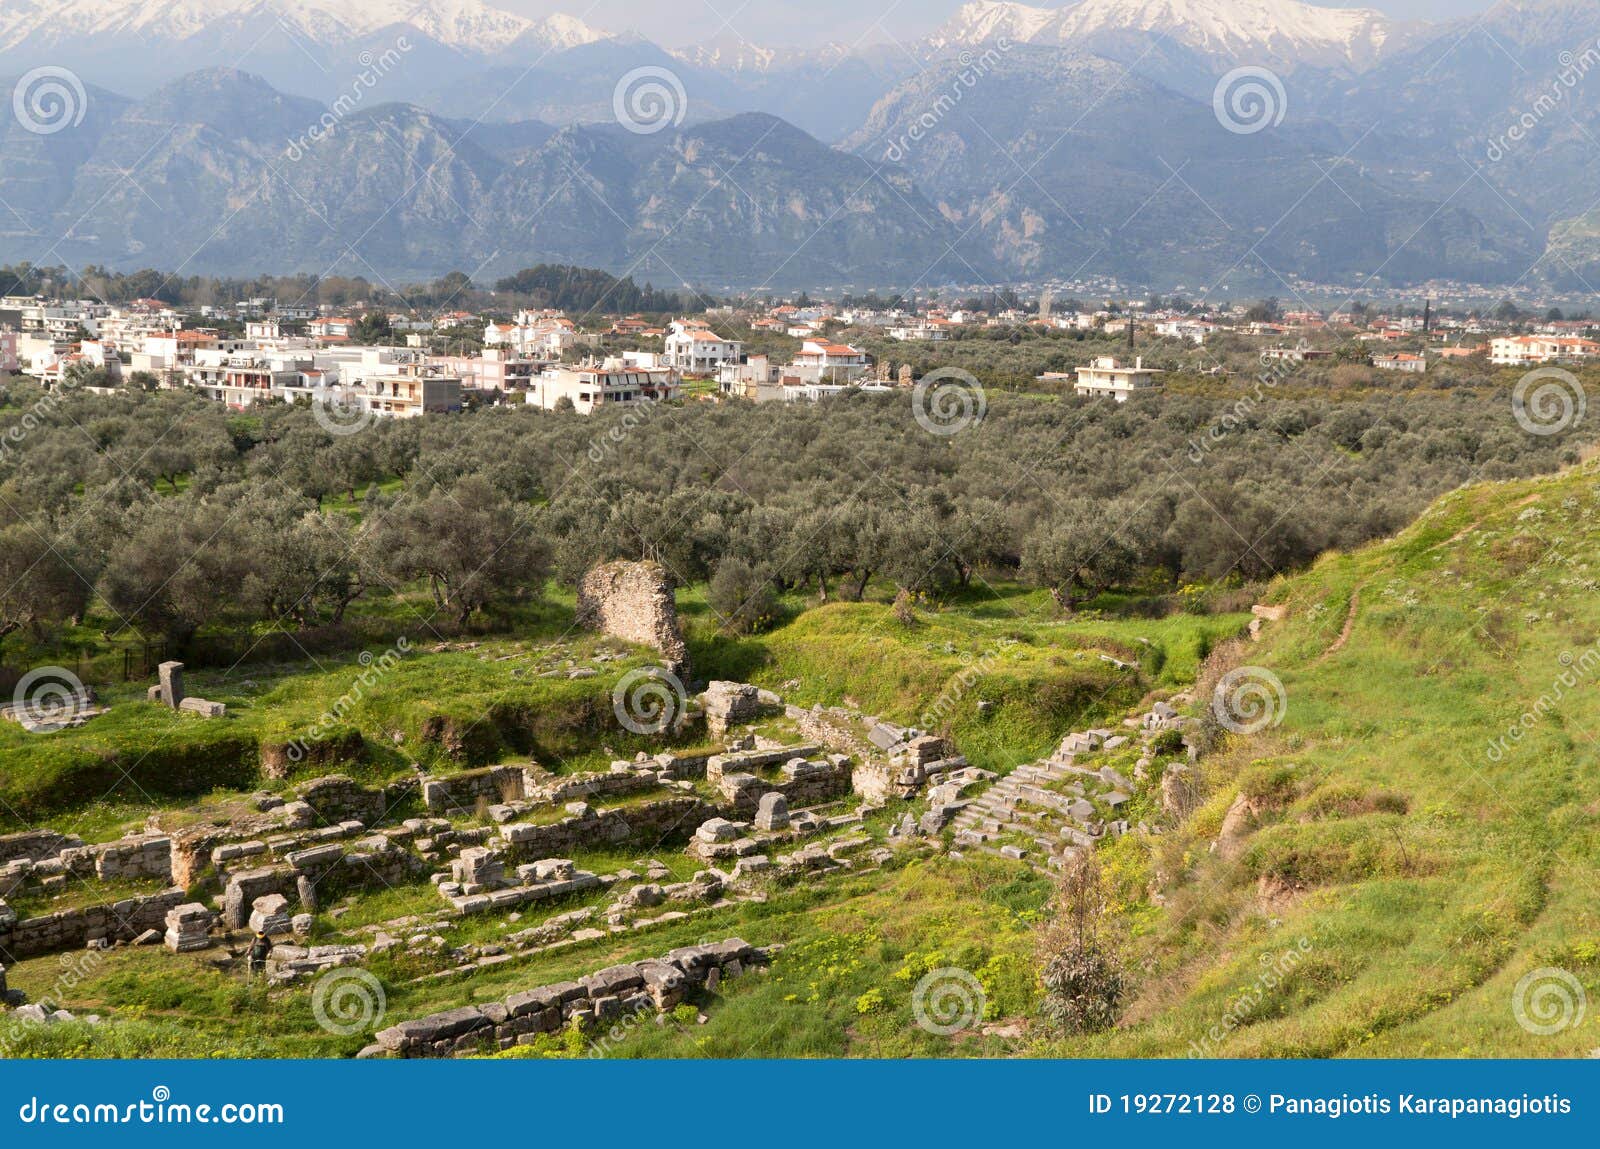 Ancient Theater And City Of Sparta, Greece Royalty Free Stock Photos